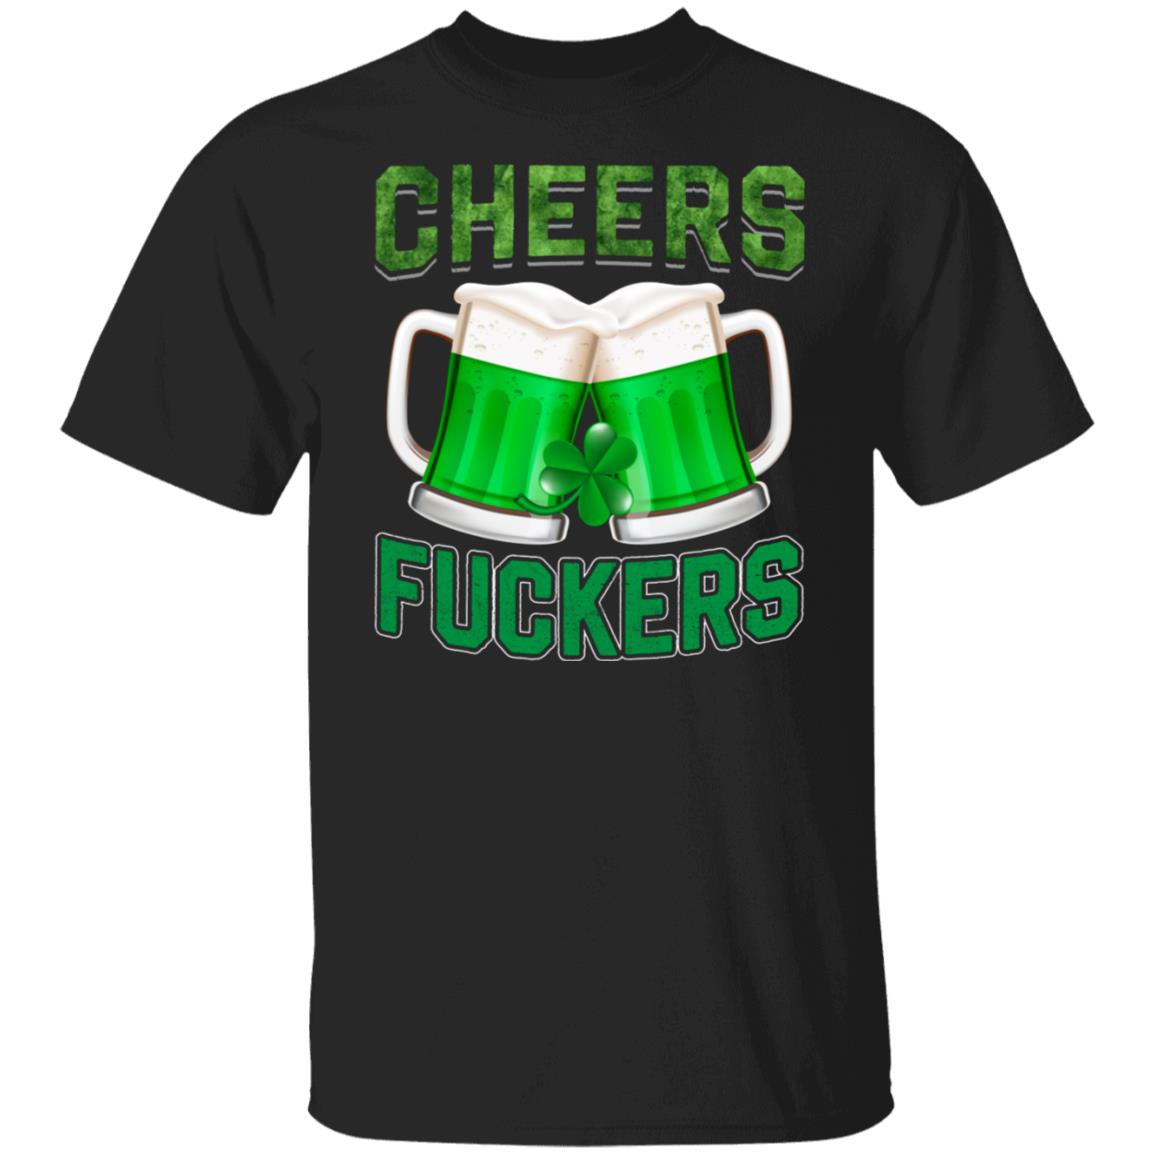 Cheers Fuckers Funny Drinking Beer St Patricks Day Party Shirt